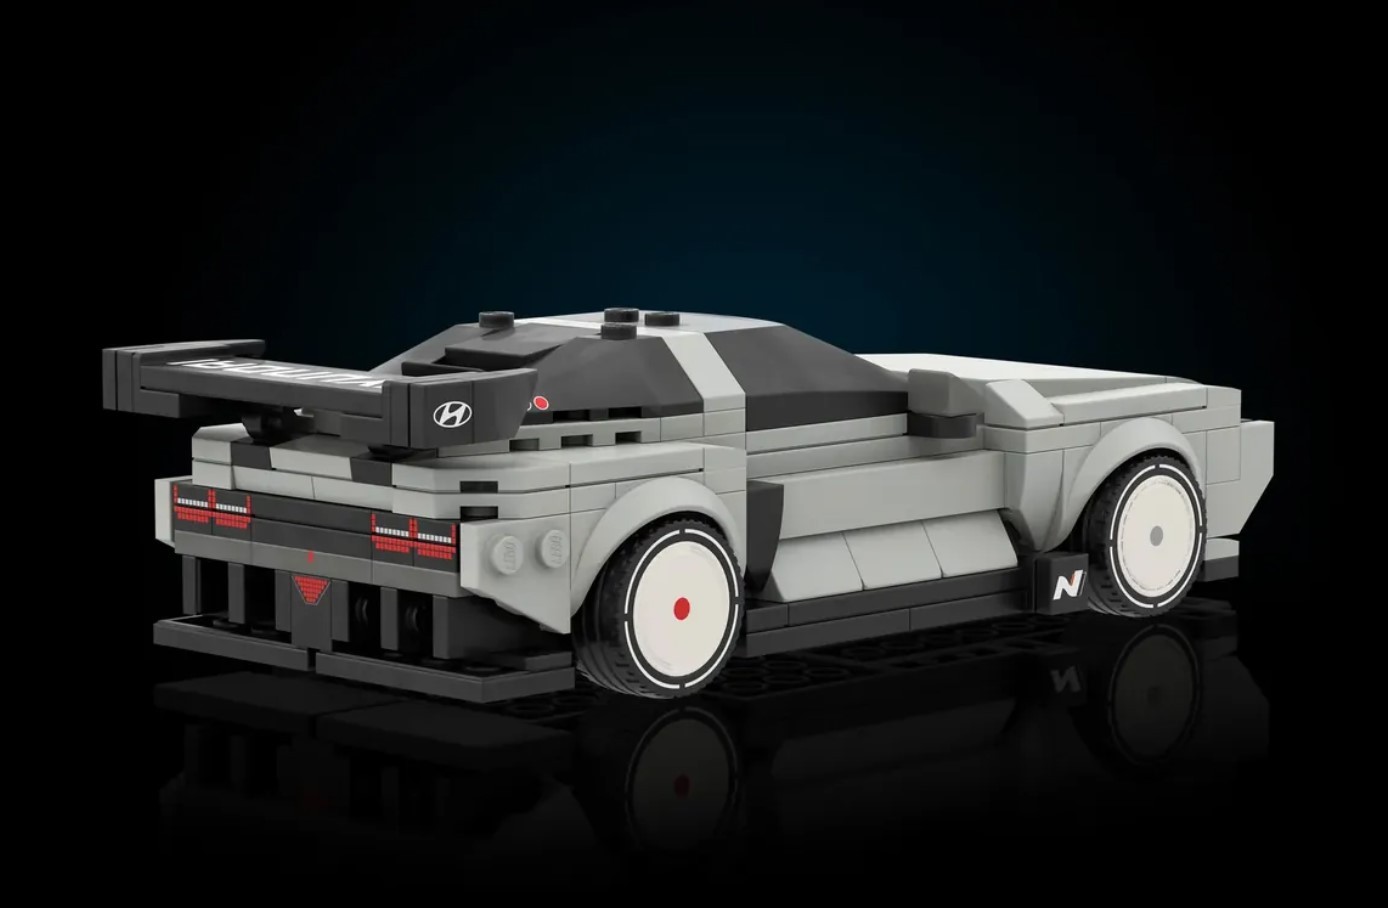 Hyundai N Vision 74 Lego Idea Looking to Build Support